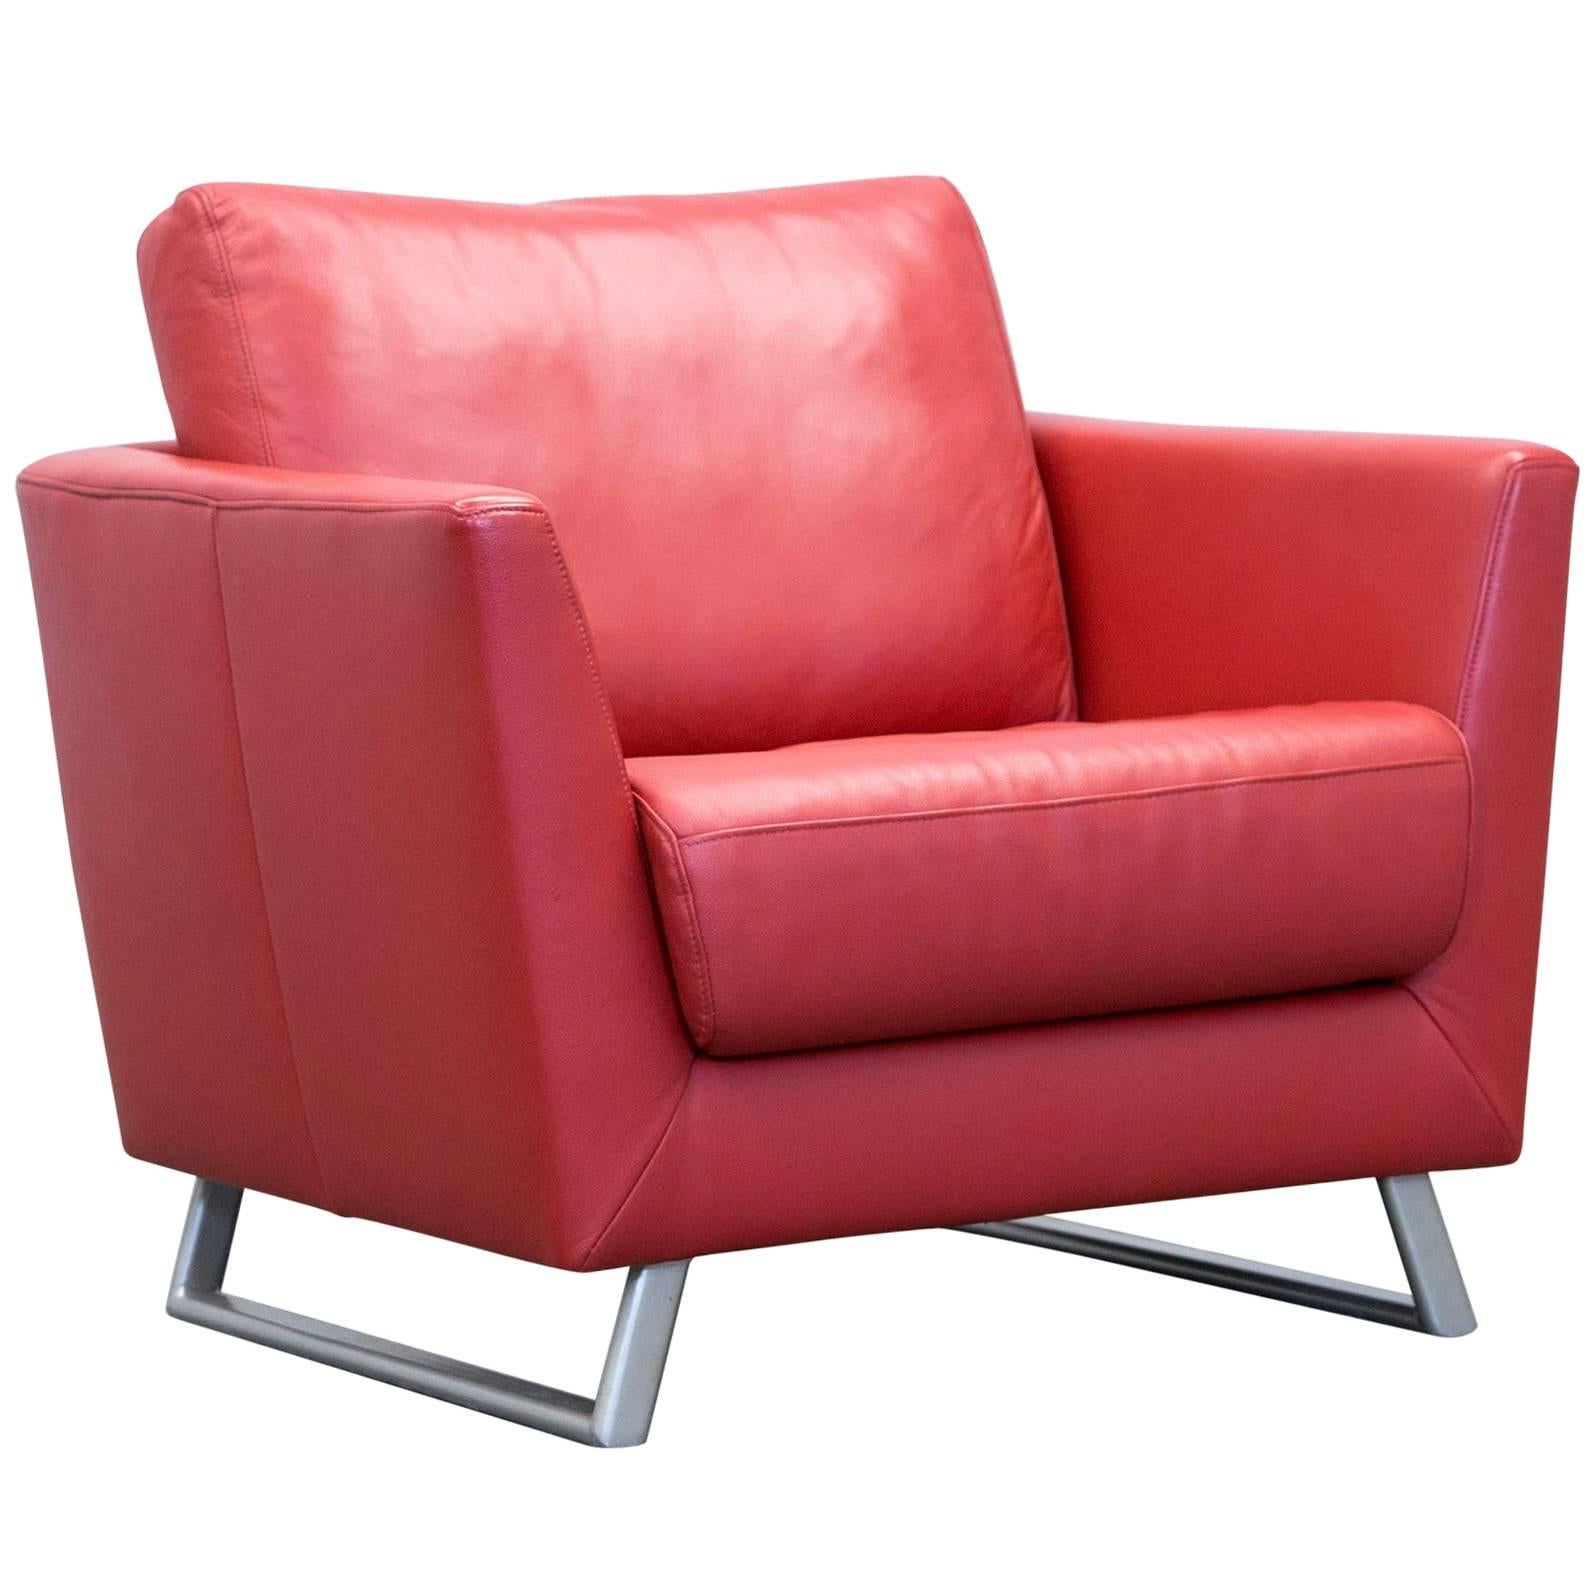 Designer Armchair Leather Red One-Seat Couch Modern For Sale